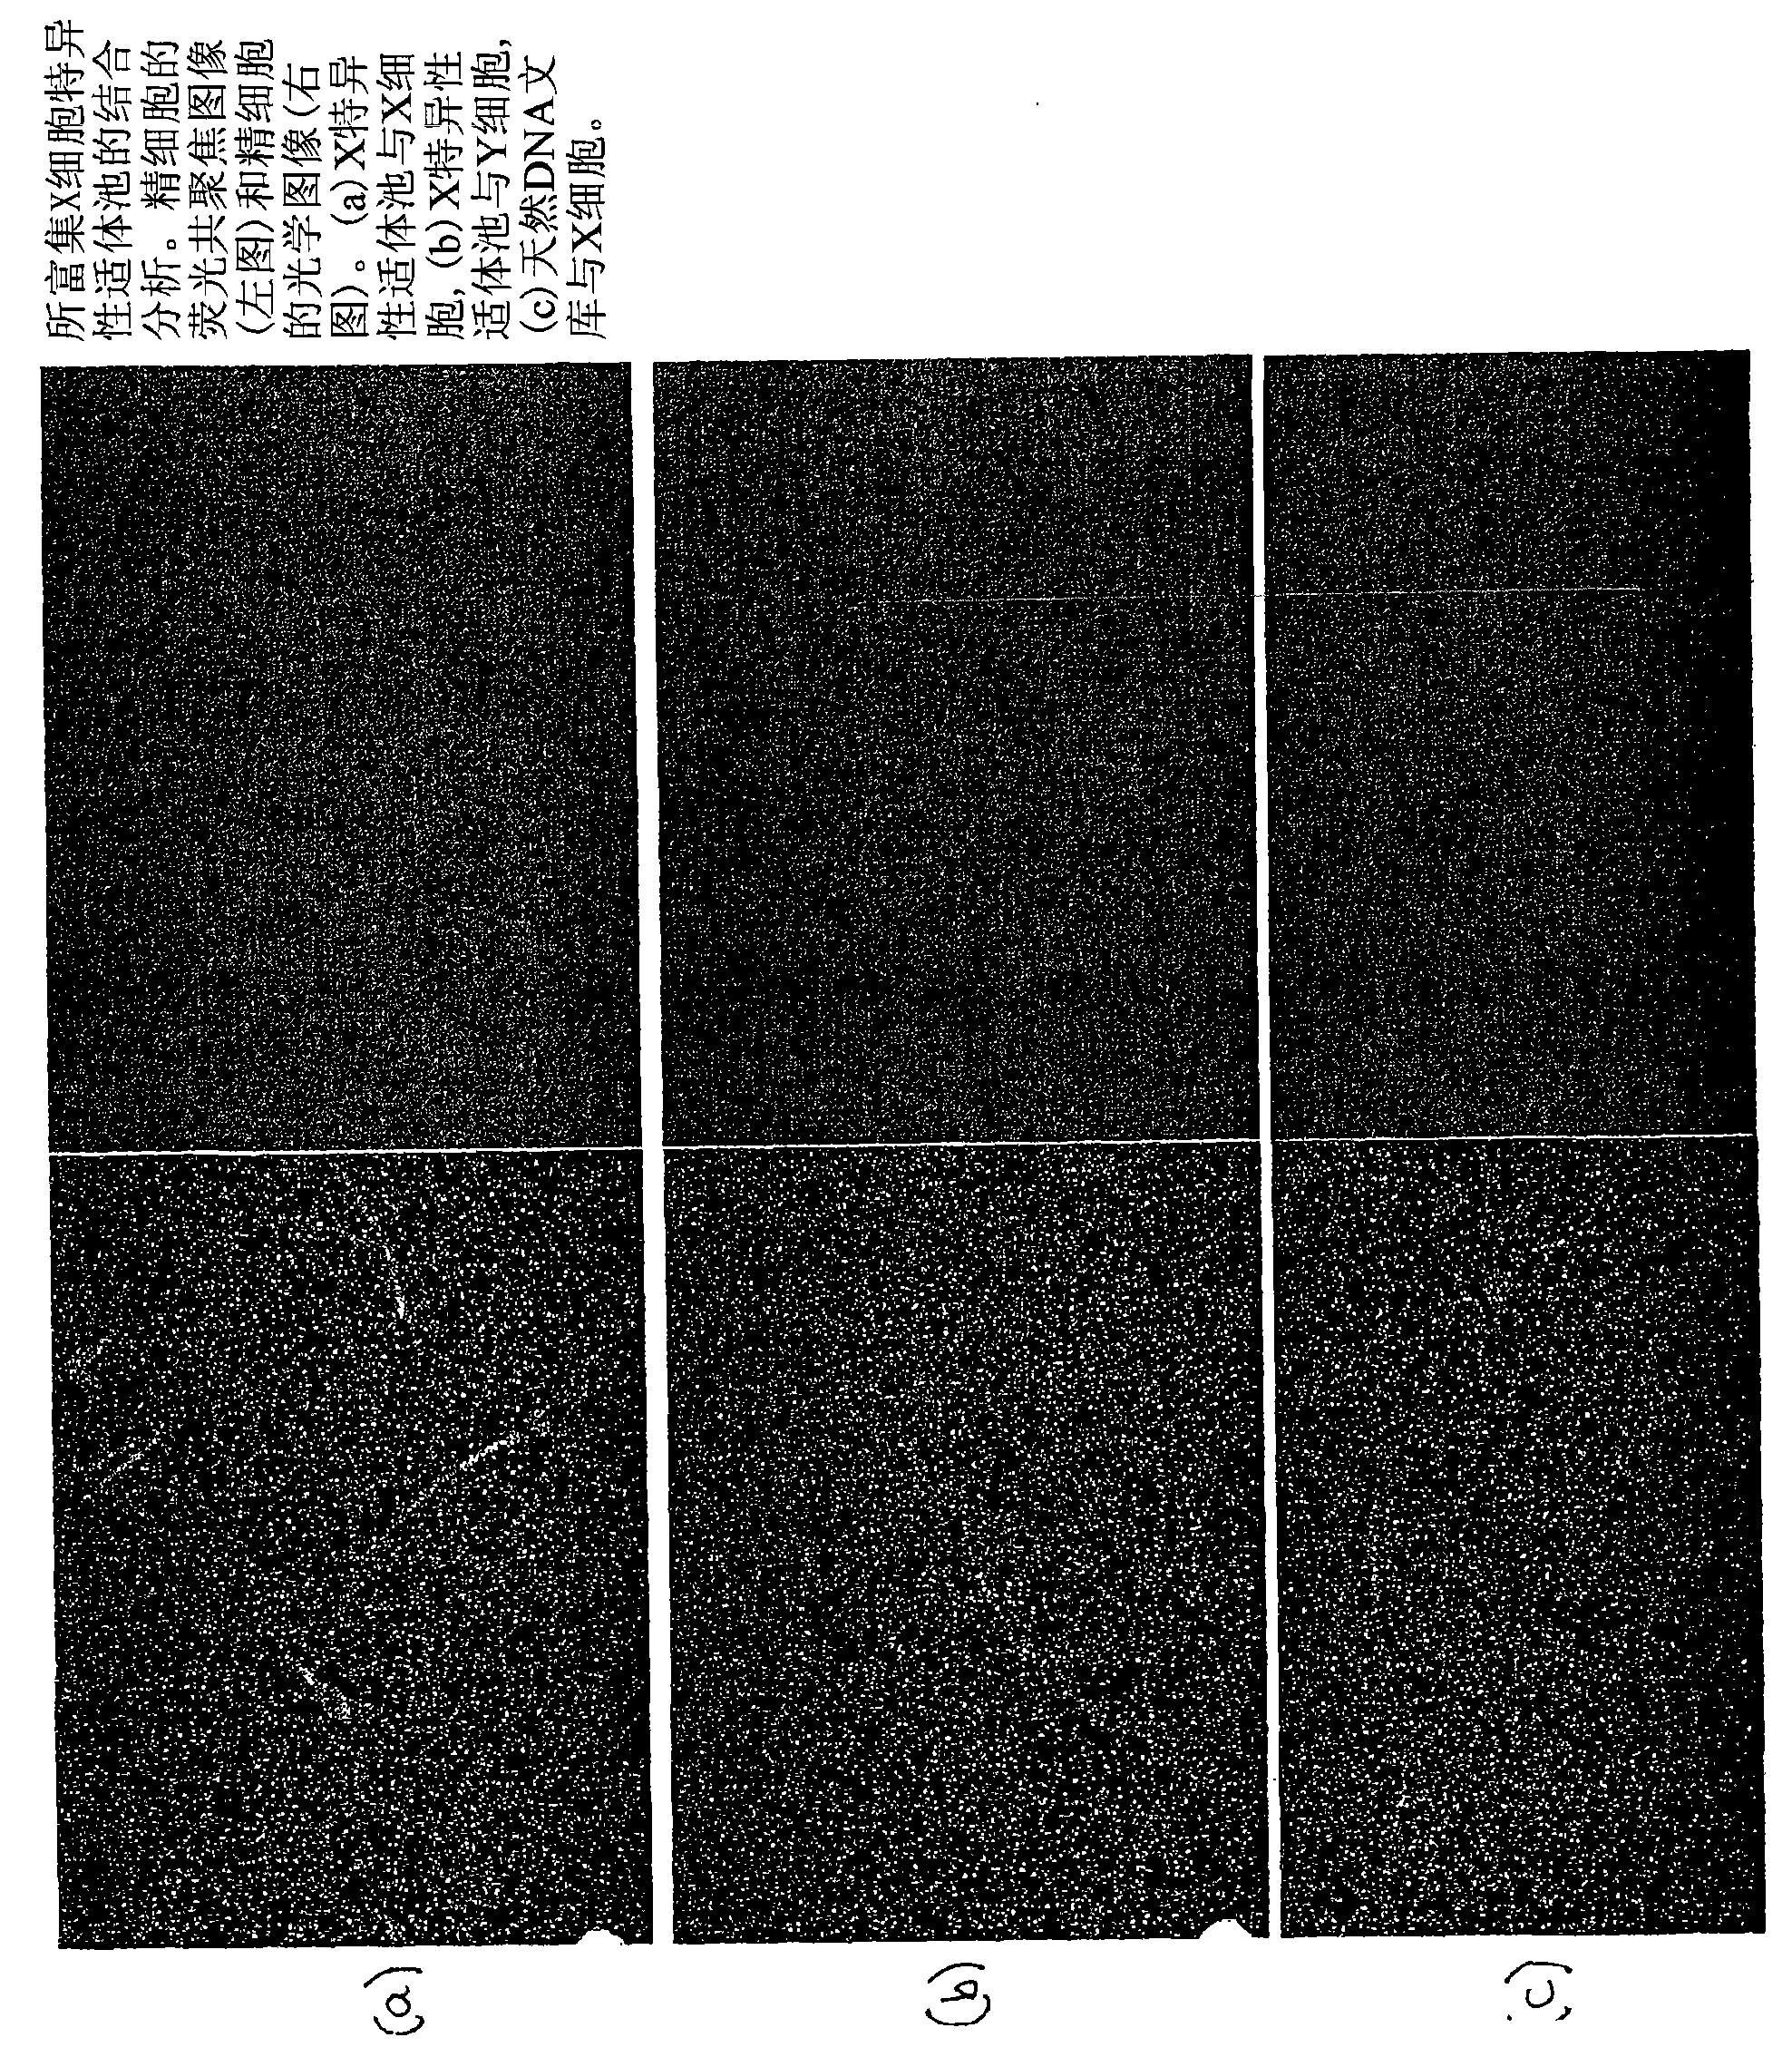 Sperm cell separation methods and compositions containing aptamers or nucleic acid sequences for use therein